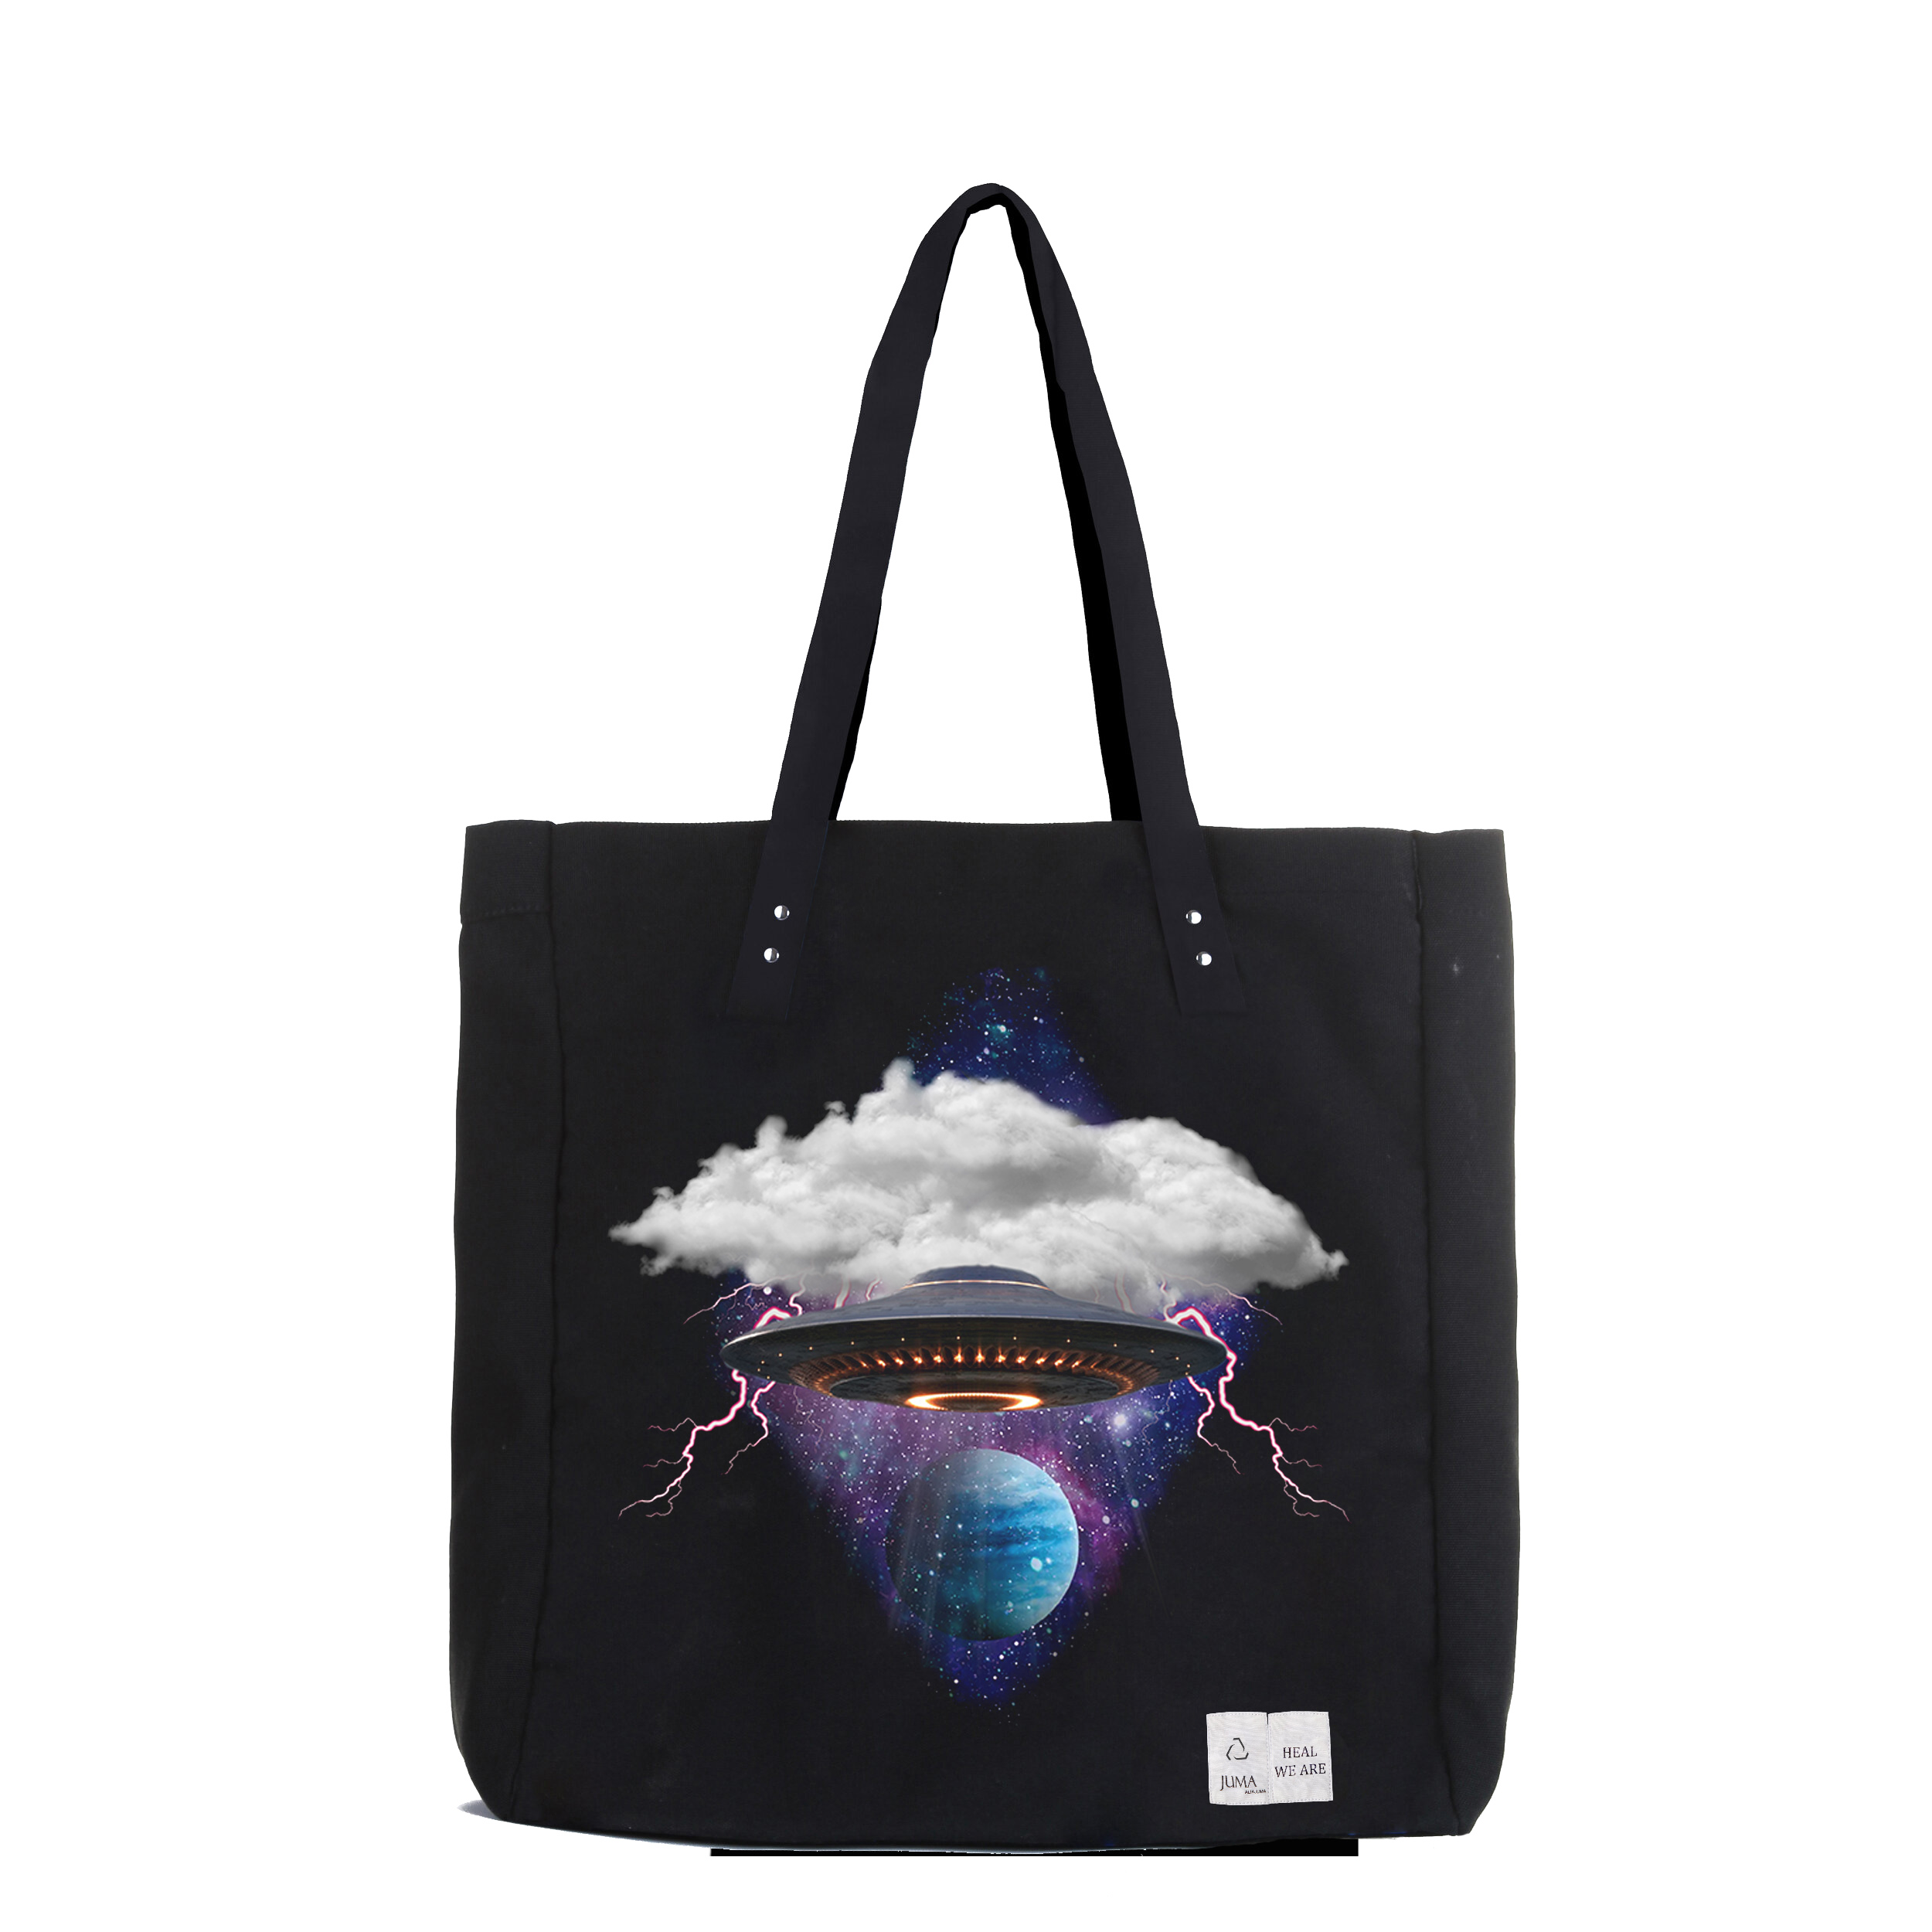 Heal We Are UFO印花手提袋 - 3回收水瓶 - 黑色｜Heal We Are UFO Print Tote Bag - 3 Recycled Water Bottles - Black